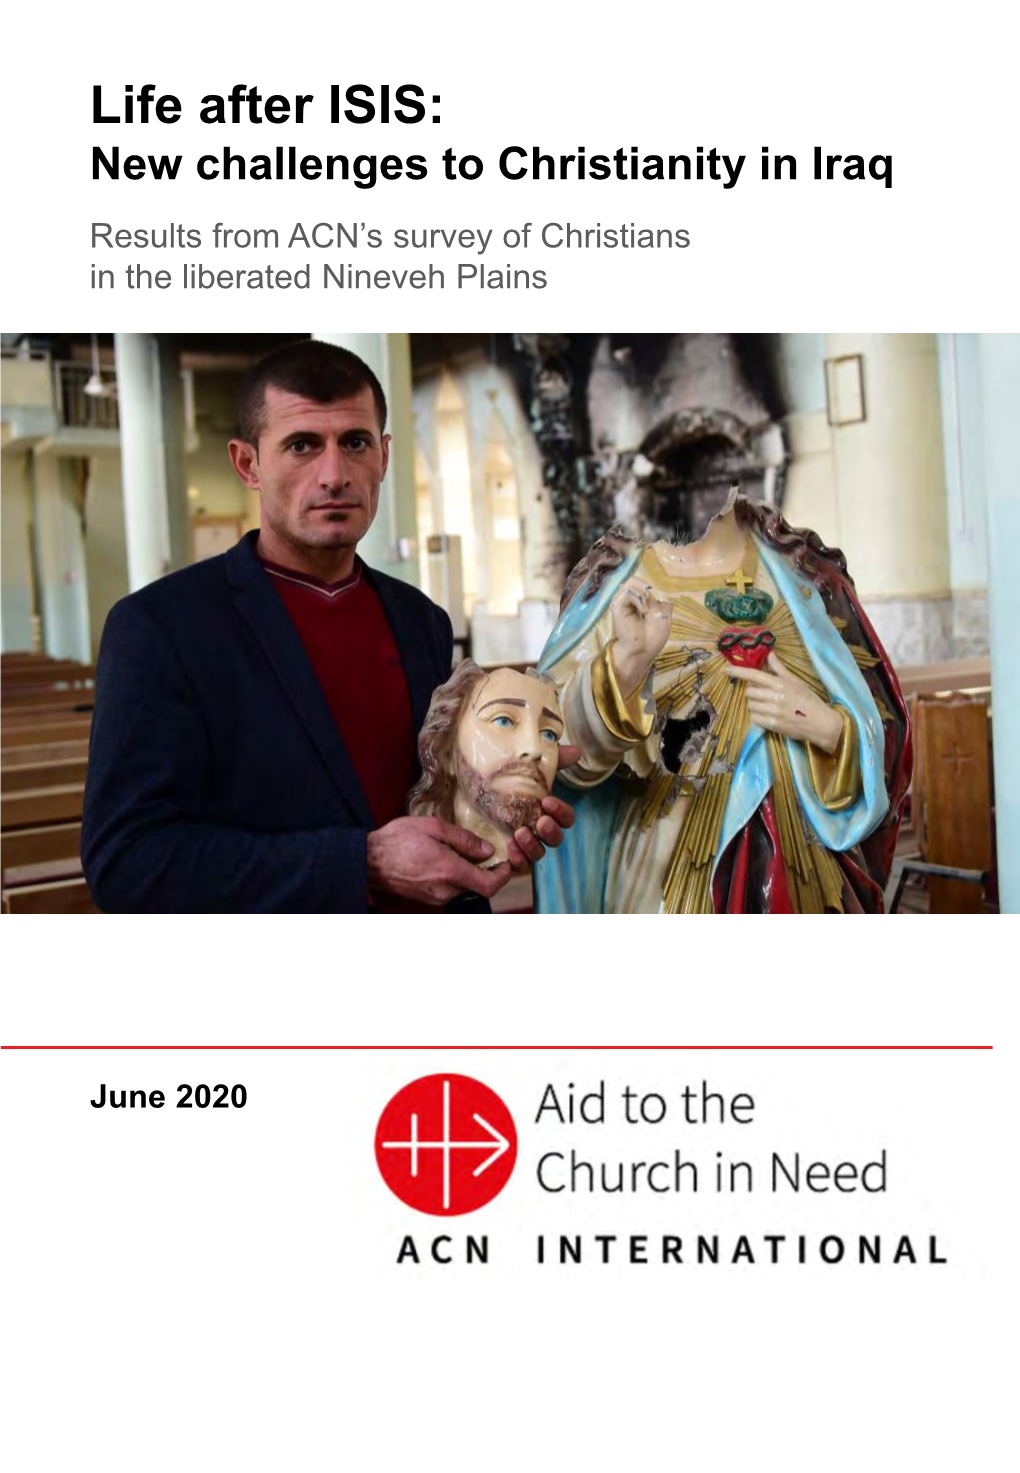 Life After ISIS: New Challenges to Christianity in Iraq Results from ACN’S Survey of Christians in the Liberated Nineveh Plains